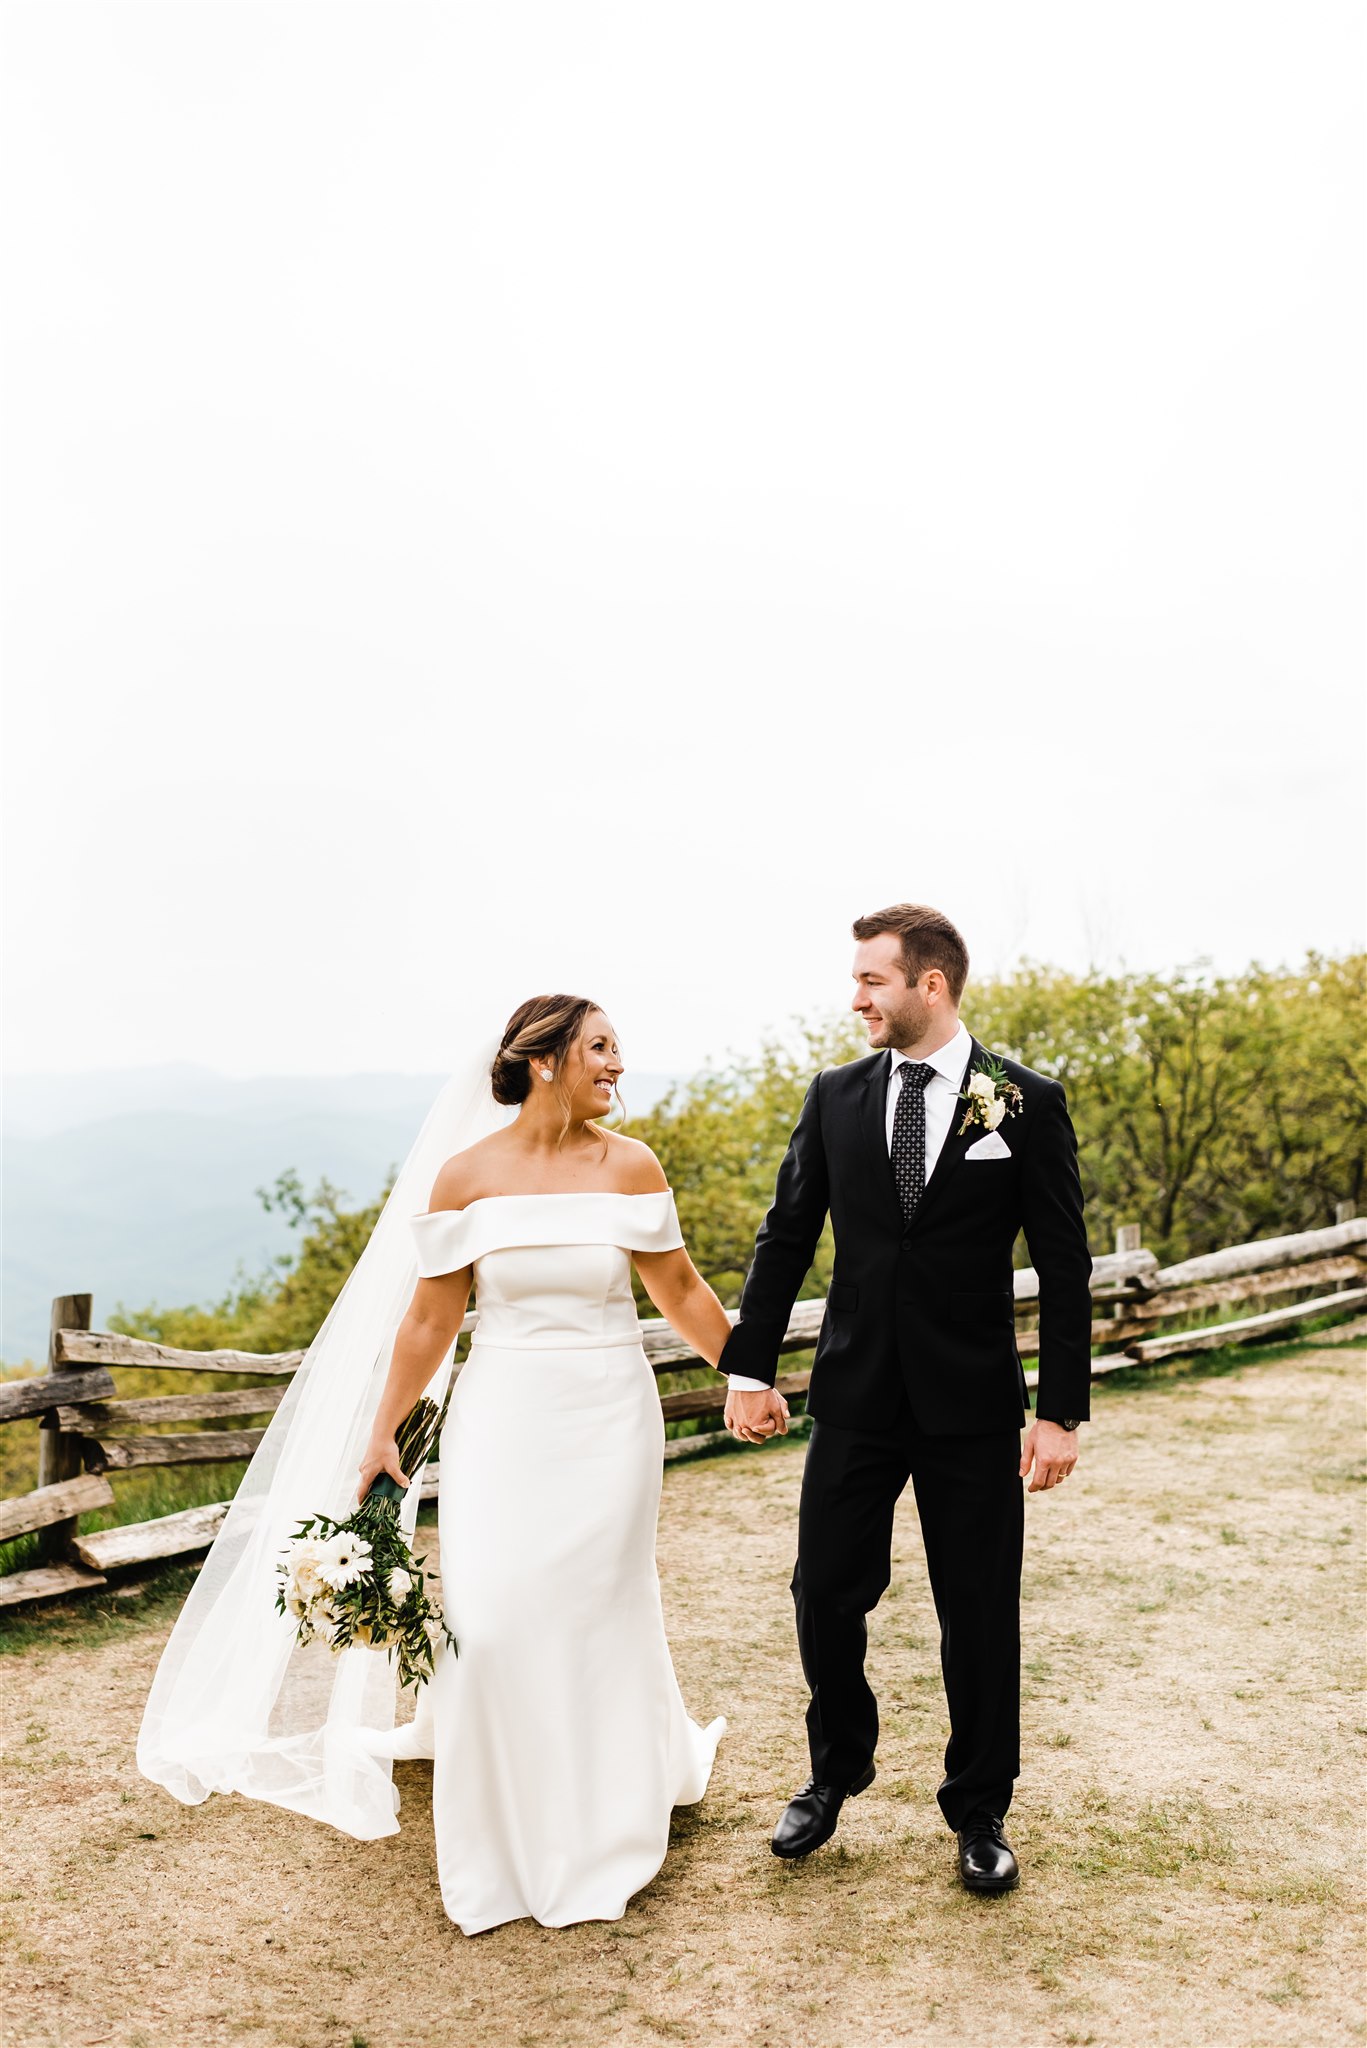 Shenandoah National Park Wedding with bride and groom holding hands and smiling at each other as they walk on a trail in the mountains for their outdoor wedding